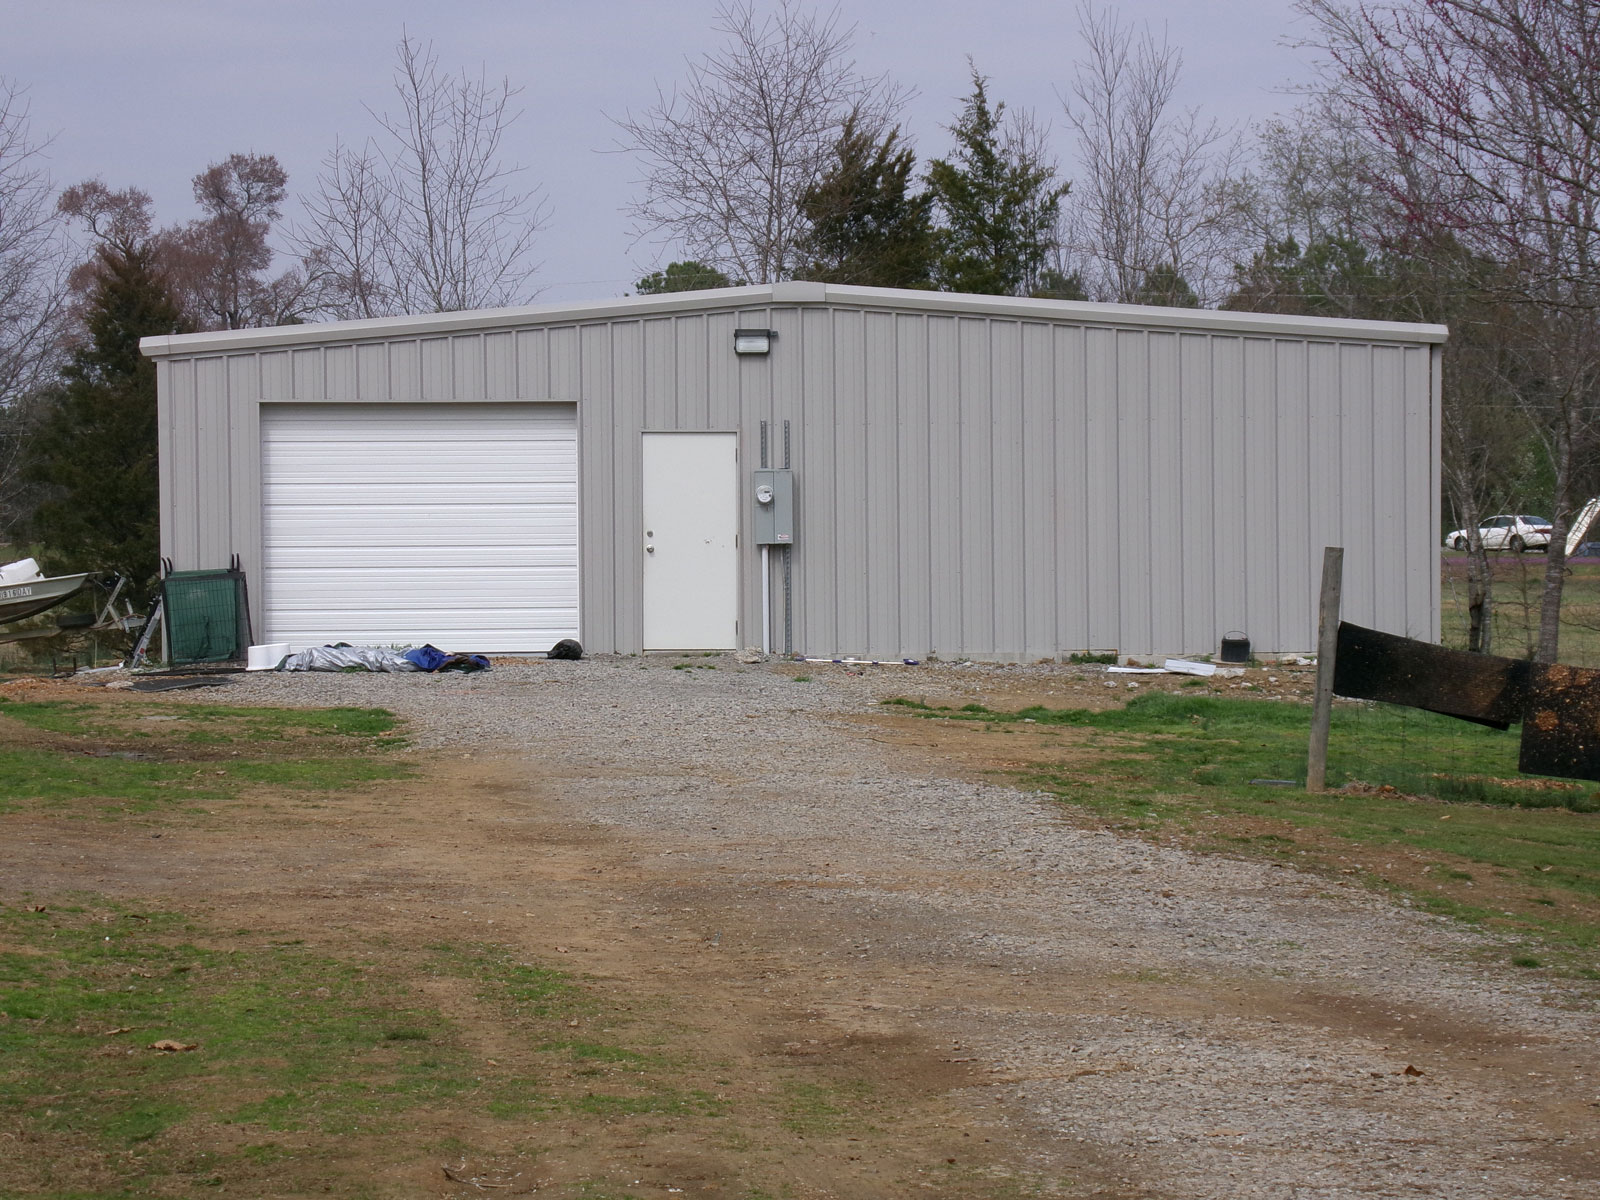 gray-storage-building-with-garageWork shop
Red iron column frame
26 gauge roof
26 gauge walls
Gutters and downspouts

Wichita kansas approx  location
1-12’x12’ roll up door
3” roof and wall insulation insulation
1-3070 steel walk doors